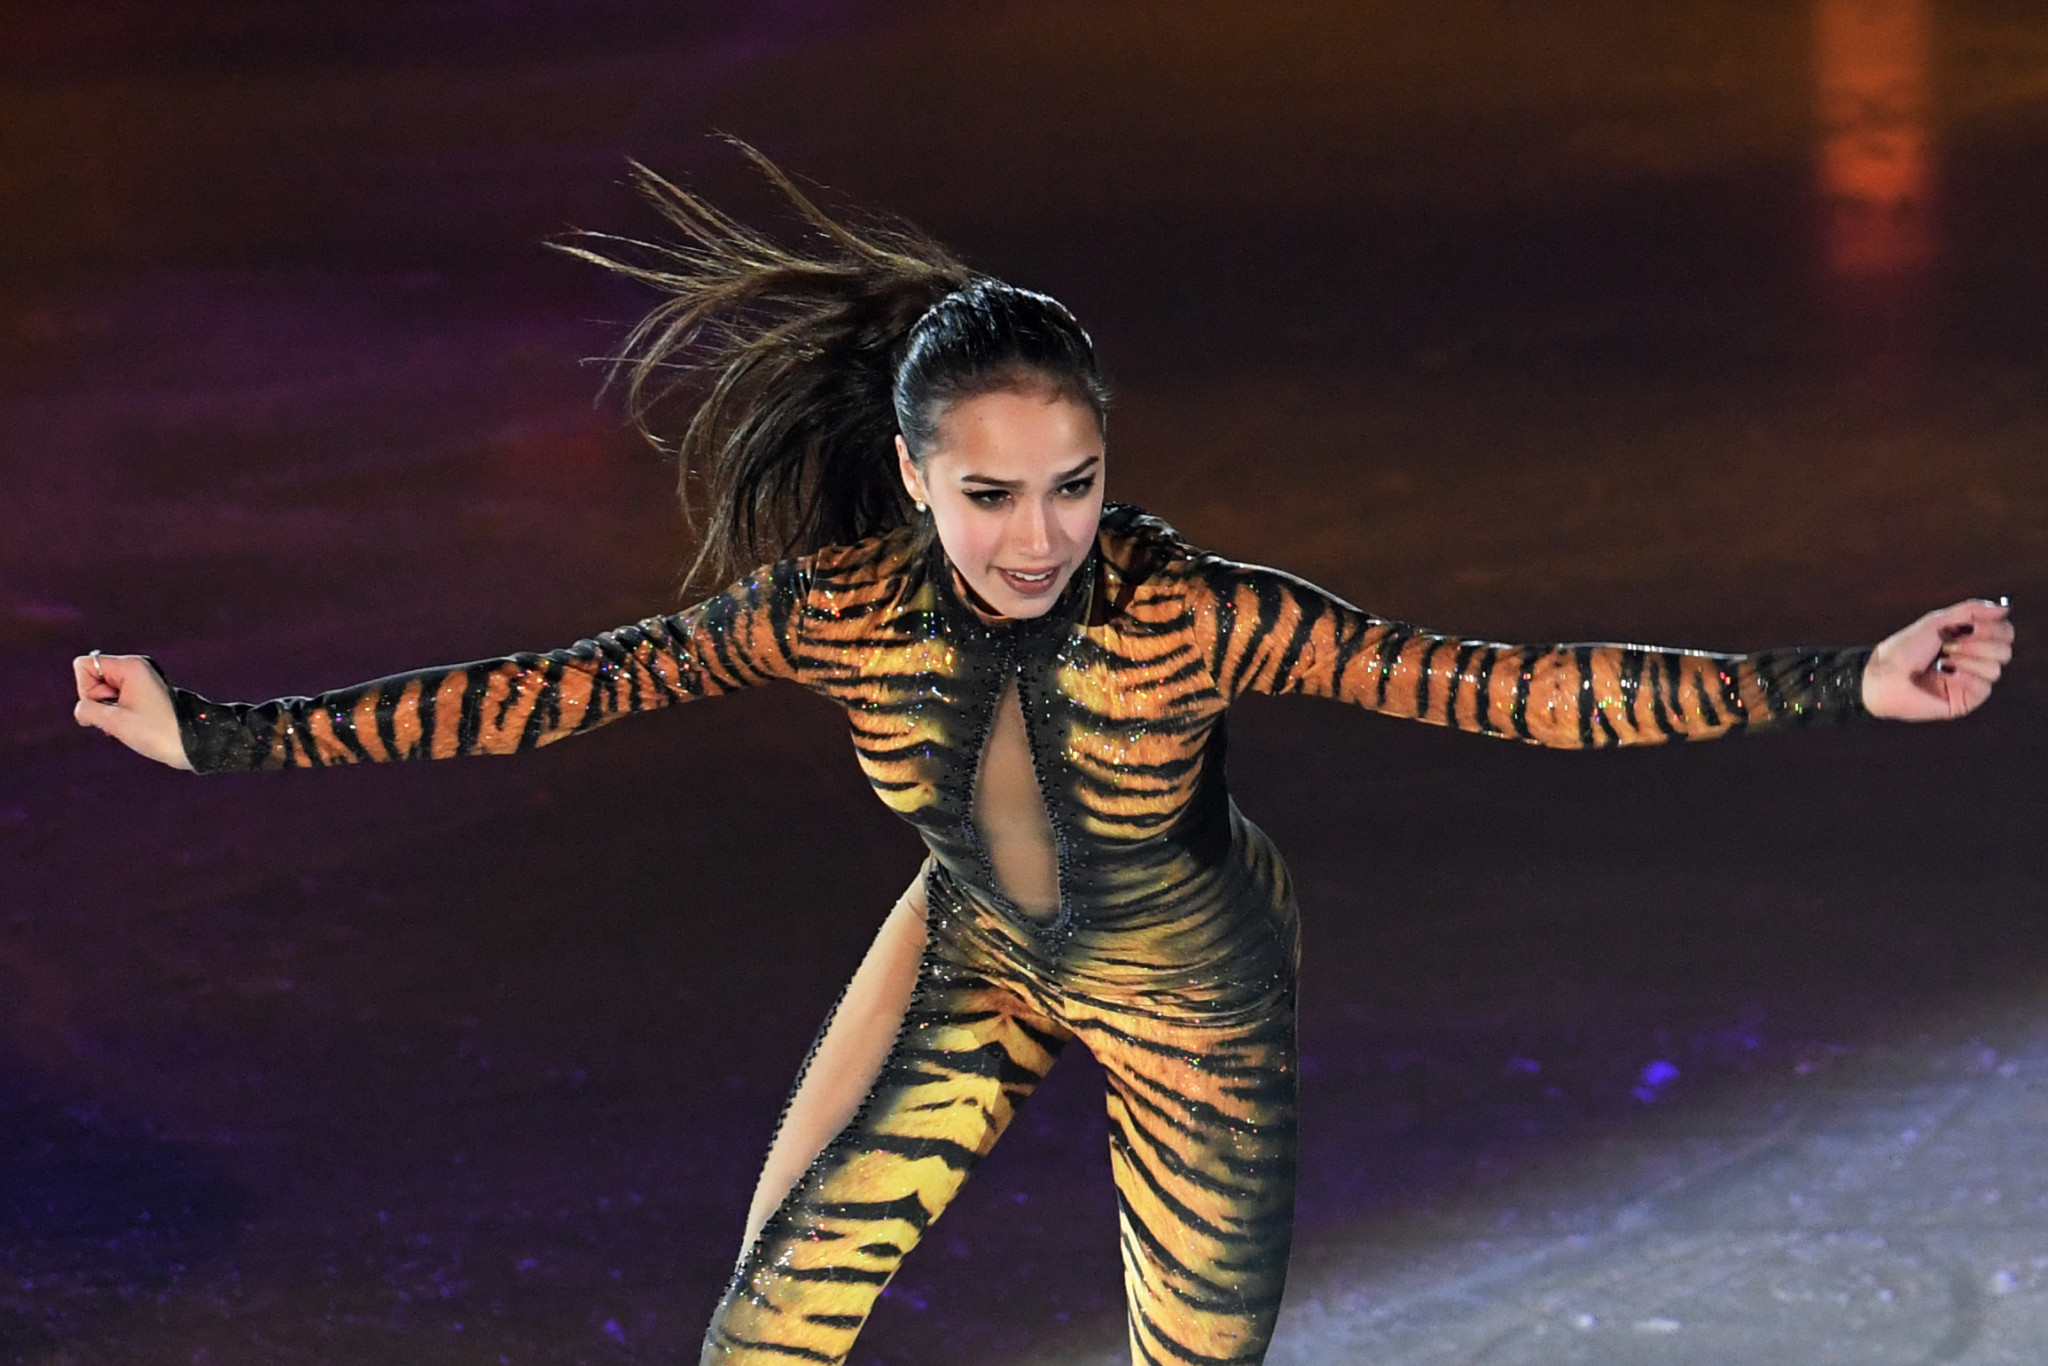 Alina Zagitova could win the senior title a year after clinching the junior crown ©Getty Images